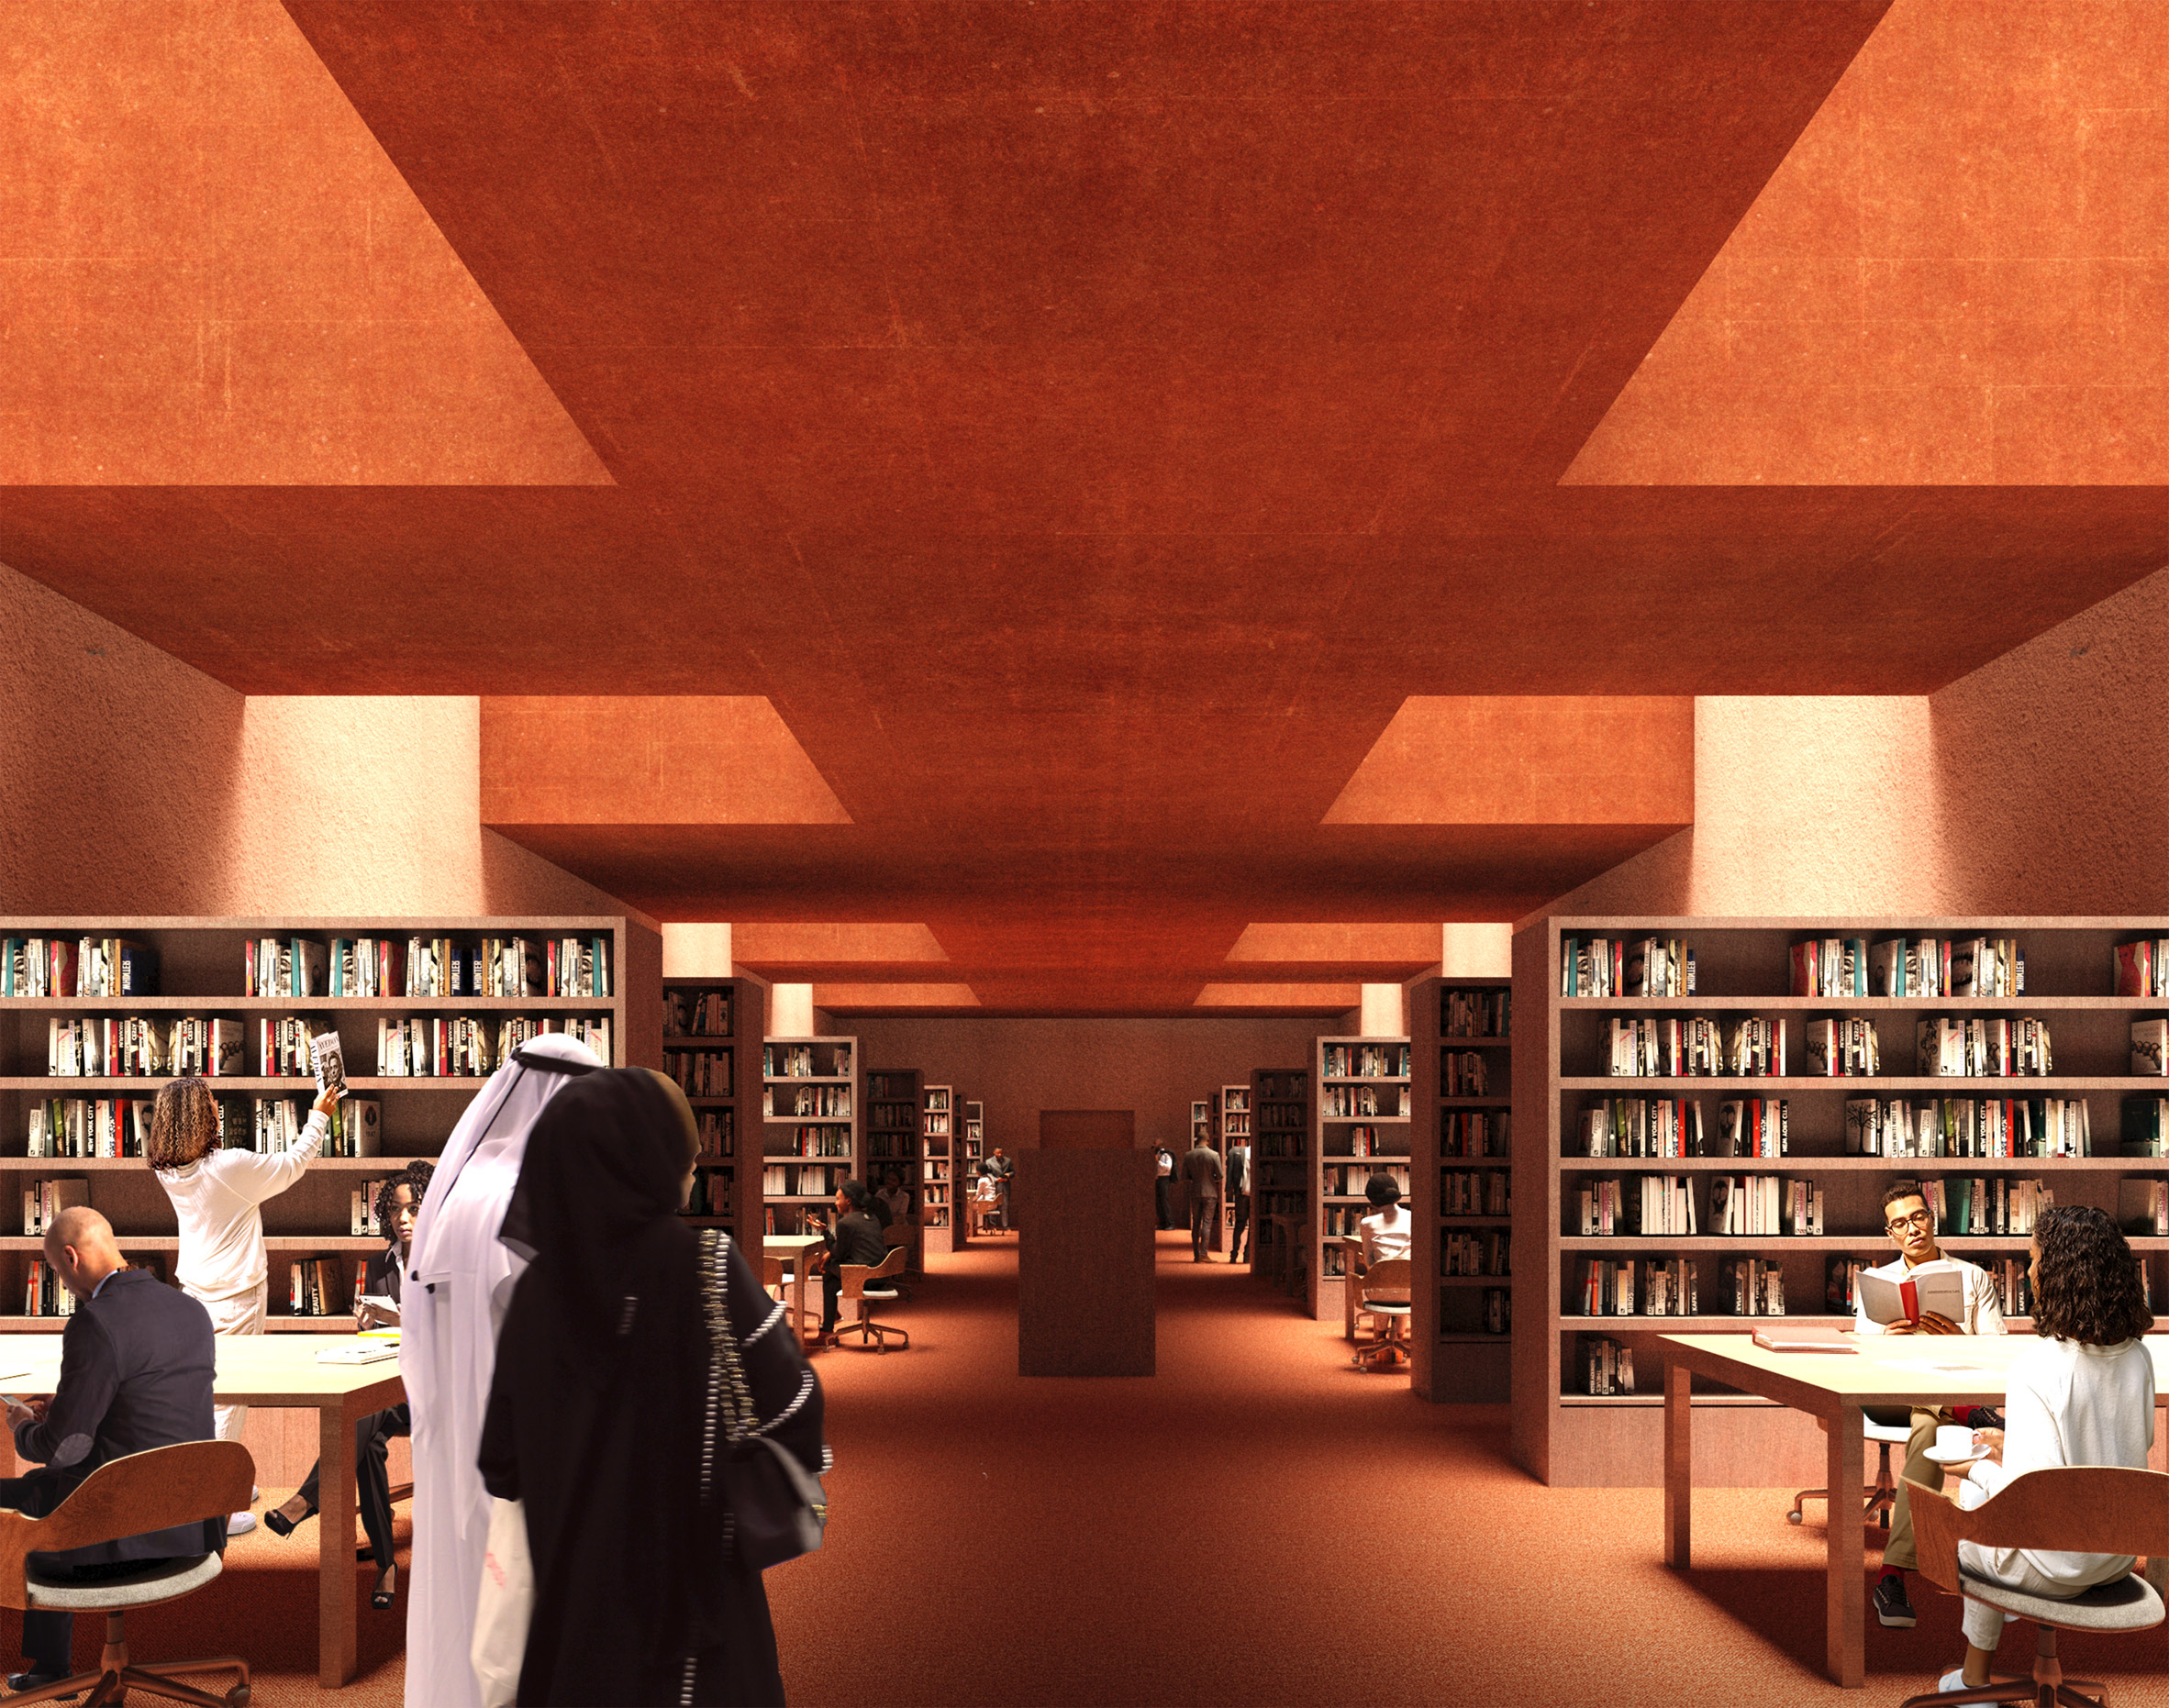 A visual of a library